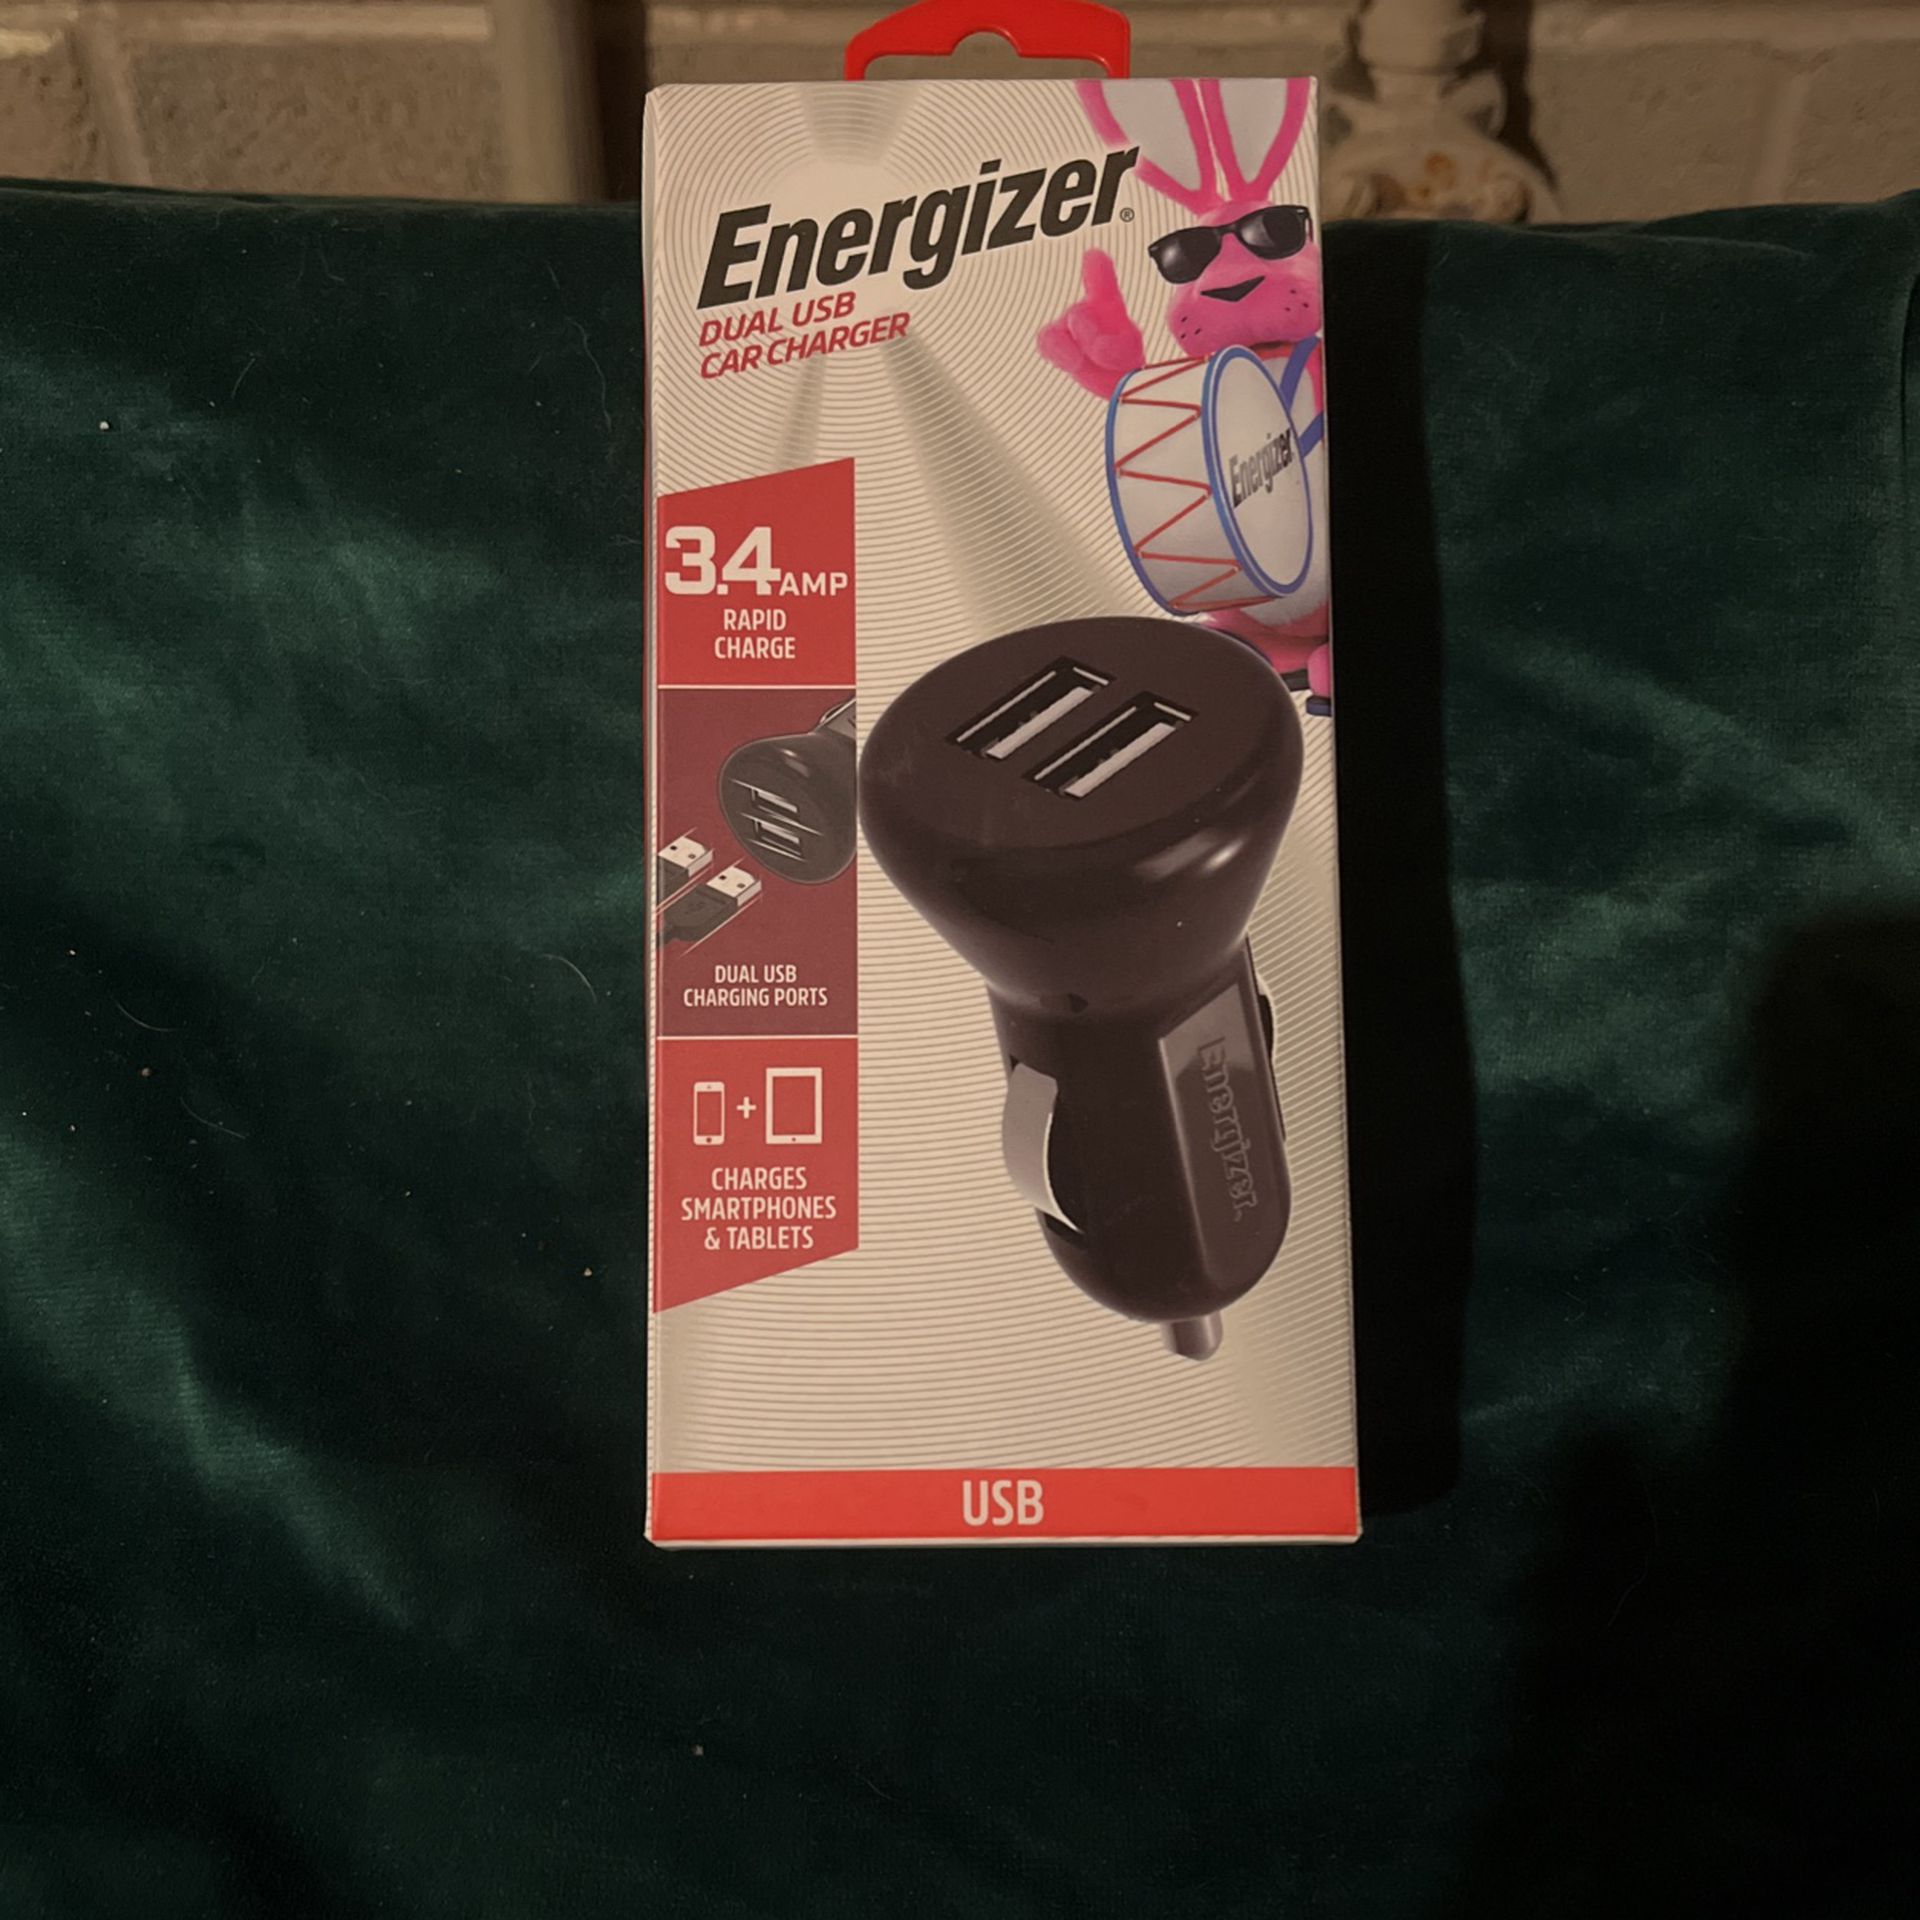 Energizer 3.4A Dual USB Car Charger